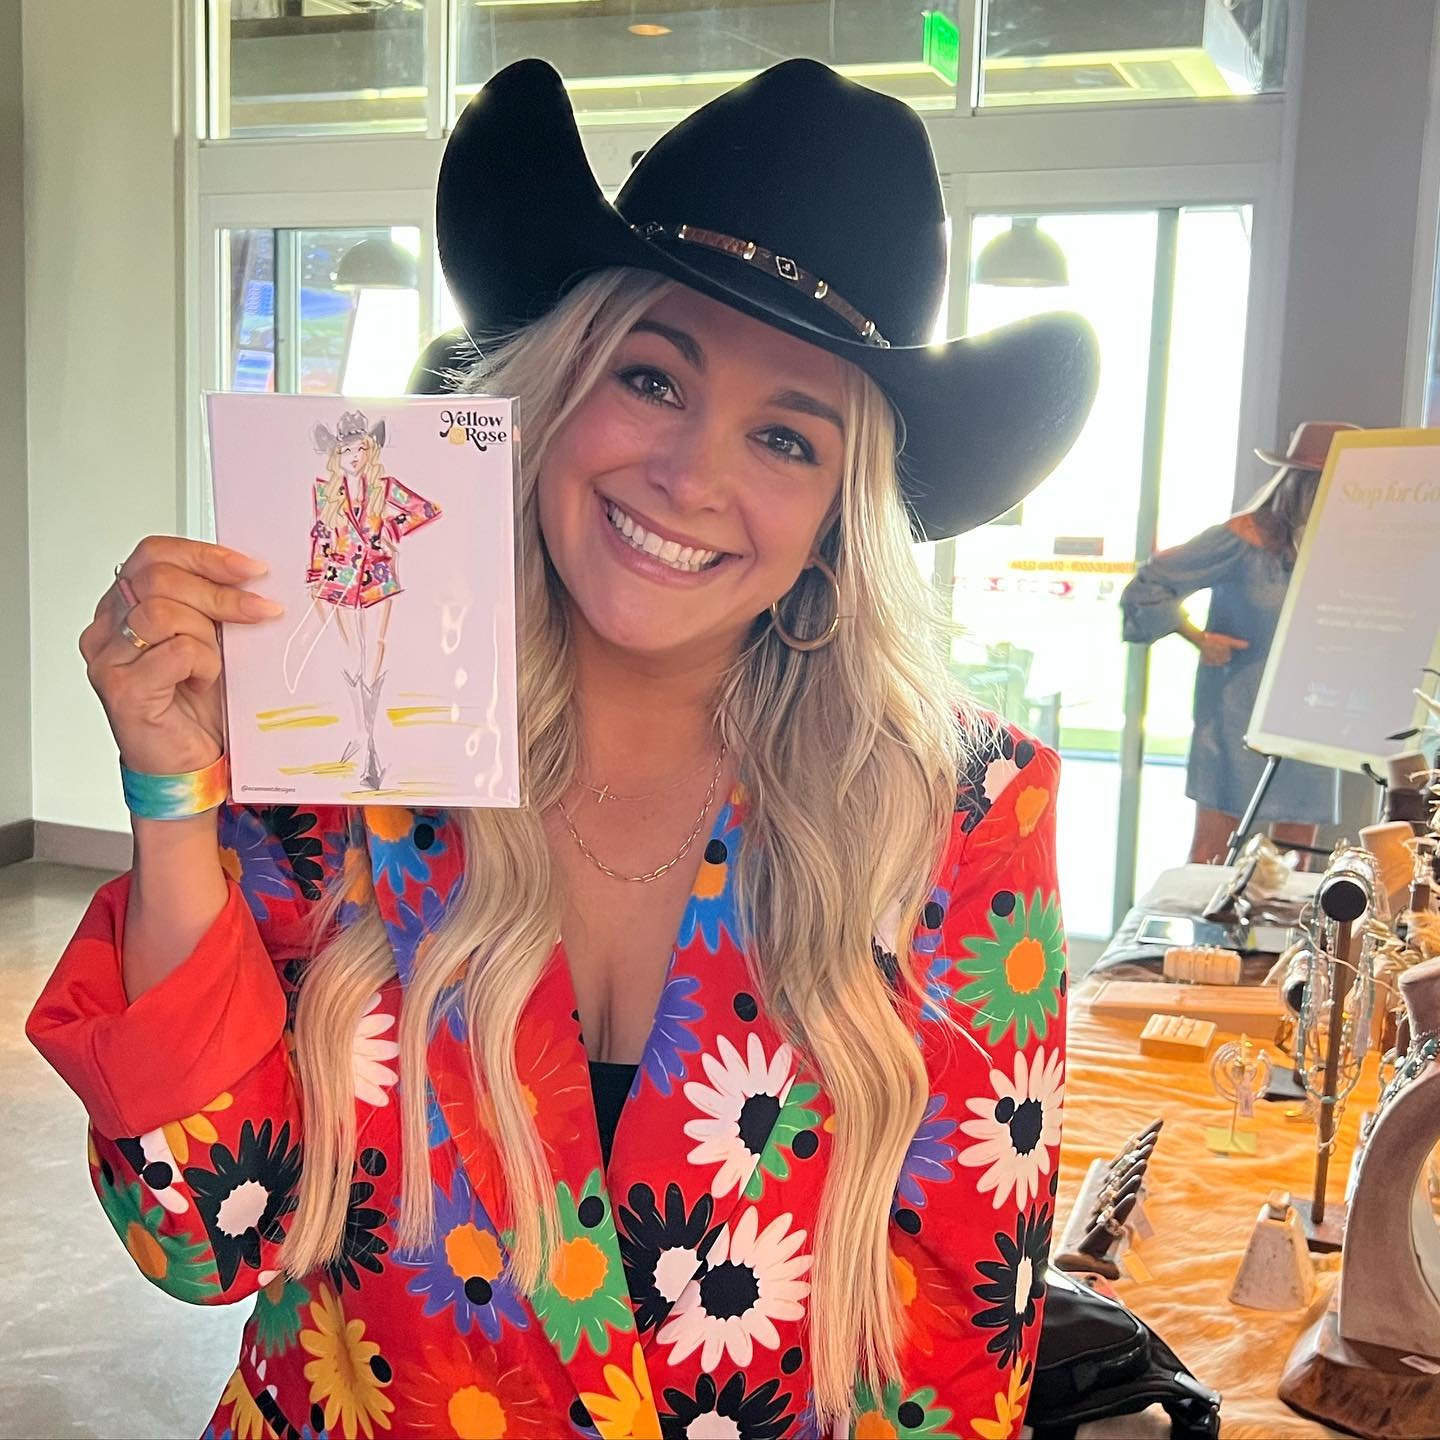 POV you walk away from @kendrascott with some fabulous new #yellowrosebykendrascott merch, AND a custom fashion sketch of yourself, drawn LIVE by moi! 💛🎨🤠💃🏻
@acmliftinglives 
.
.
#livesketch #liveillustration #brandactivation #eventactivation #p